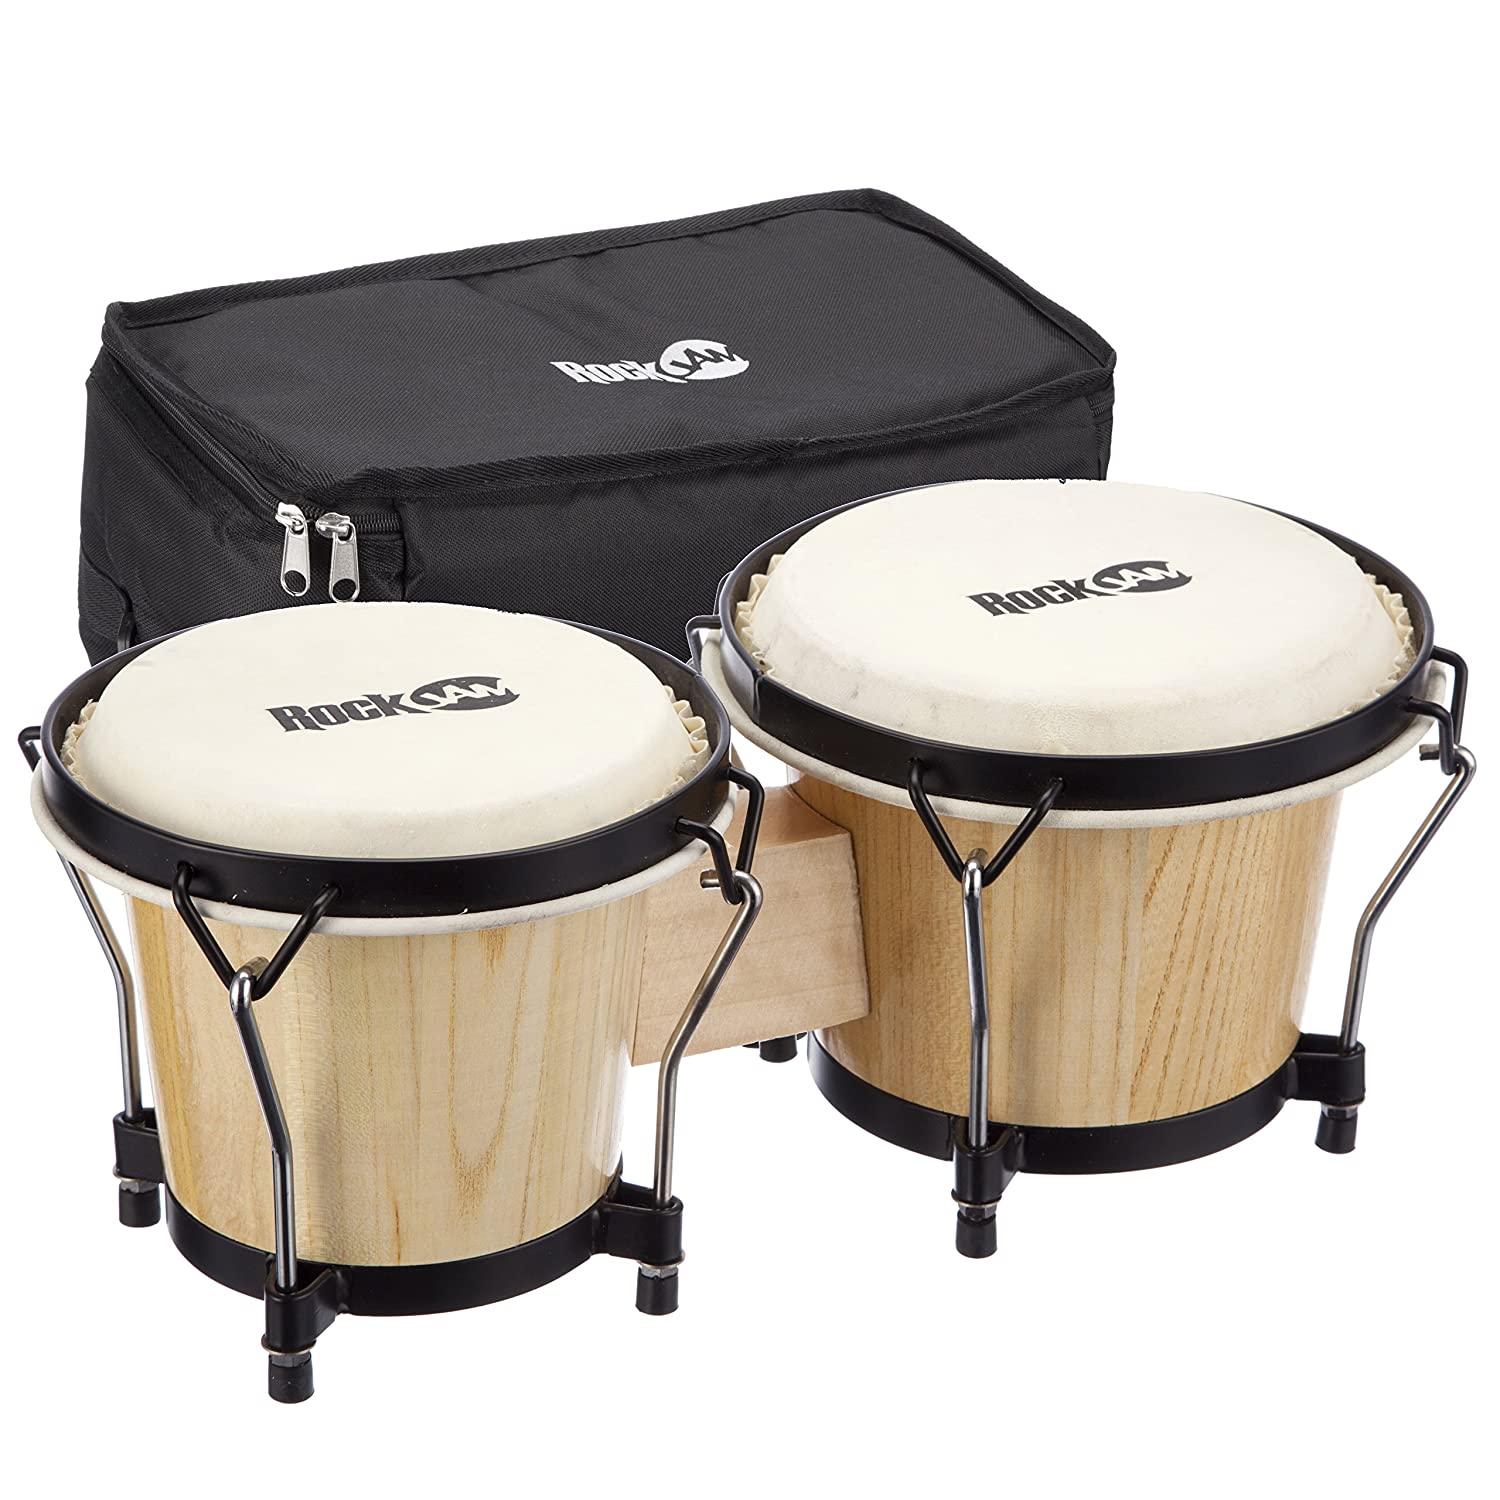 9 Best Bongo Drums for Kids 2022 - Reviews & Buying Guide 3